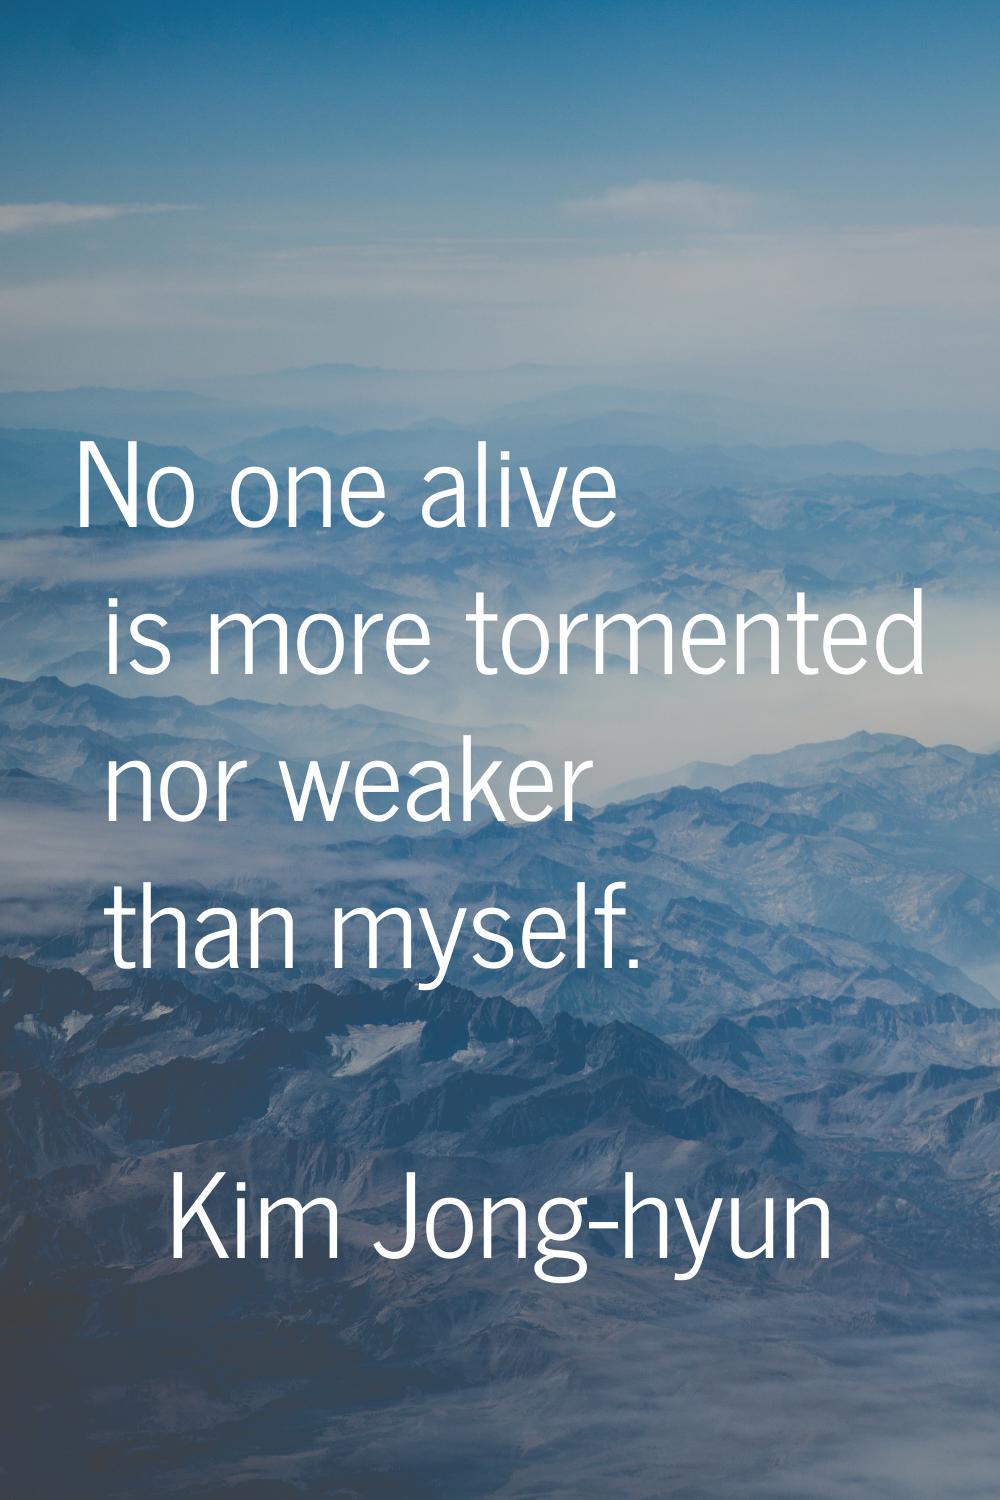 No one alive is more tormented nor weaker than myself.